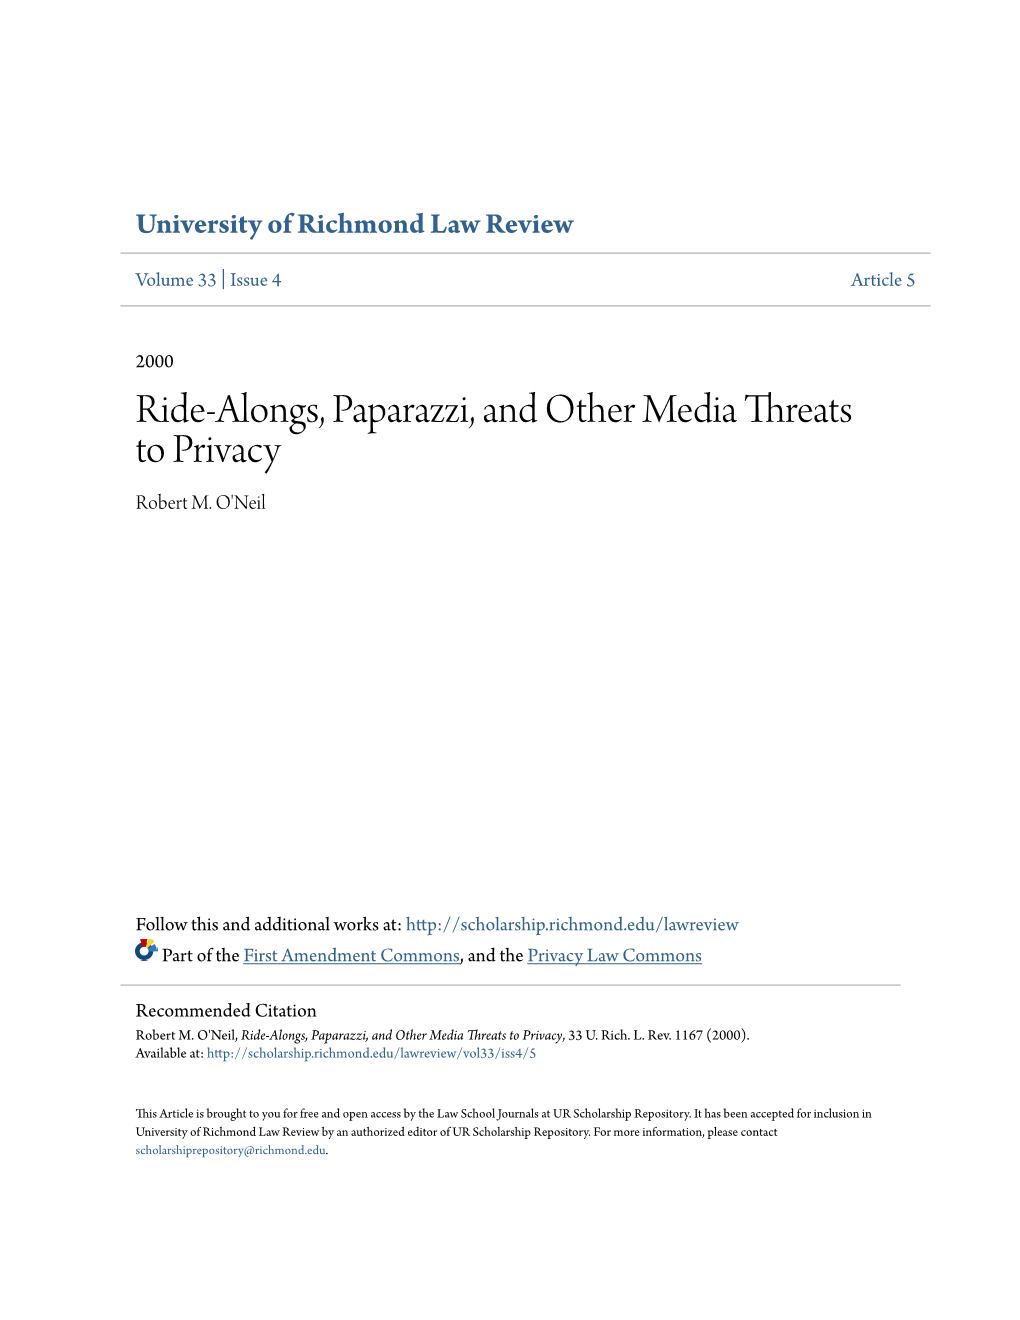 Ride-Alongs, Paparazzi, and Other Media Threats to Privacy Robert M